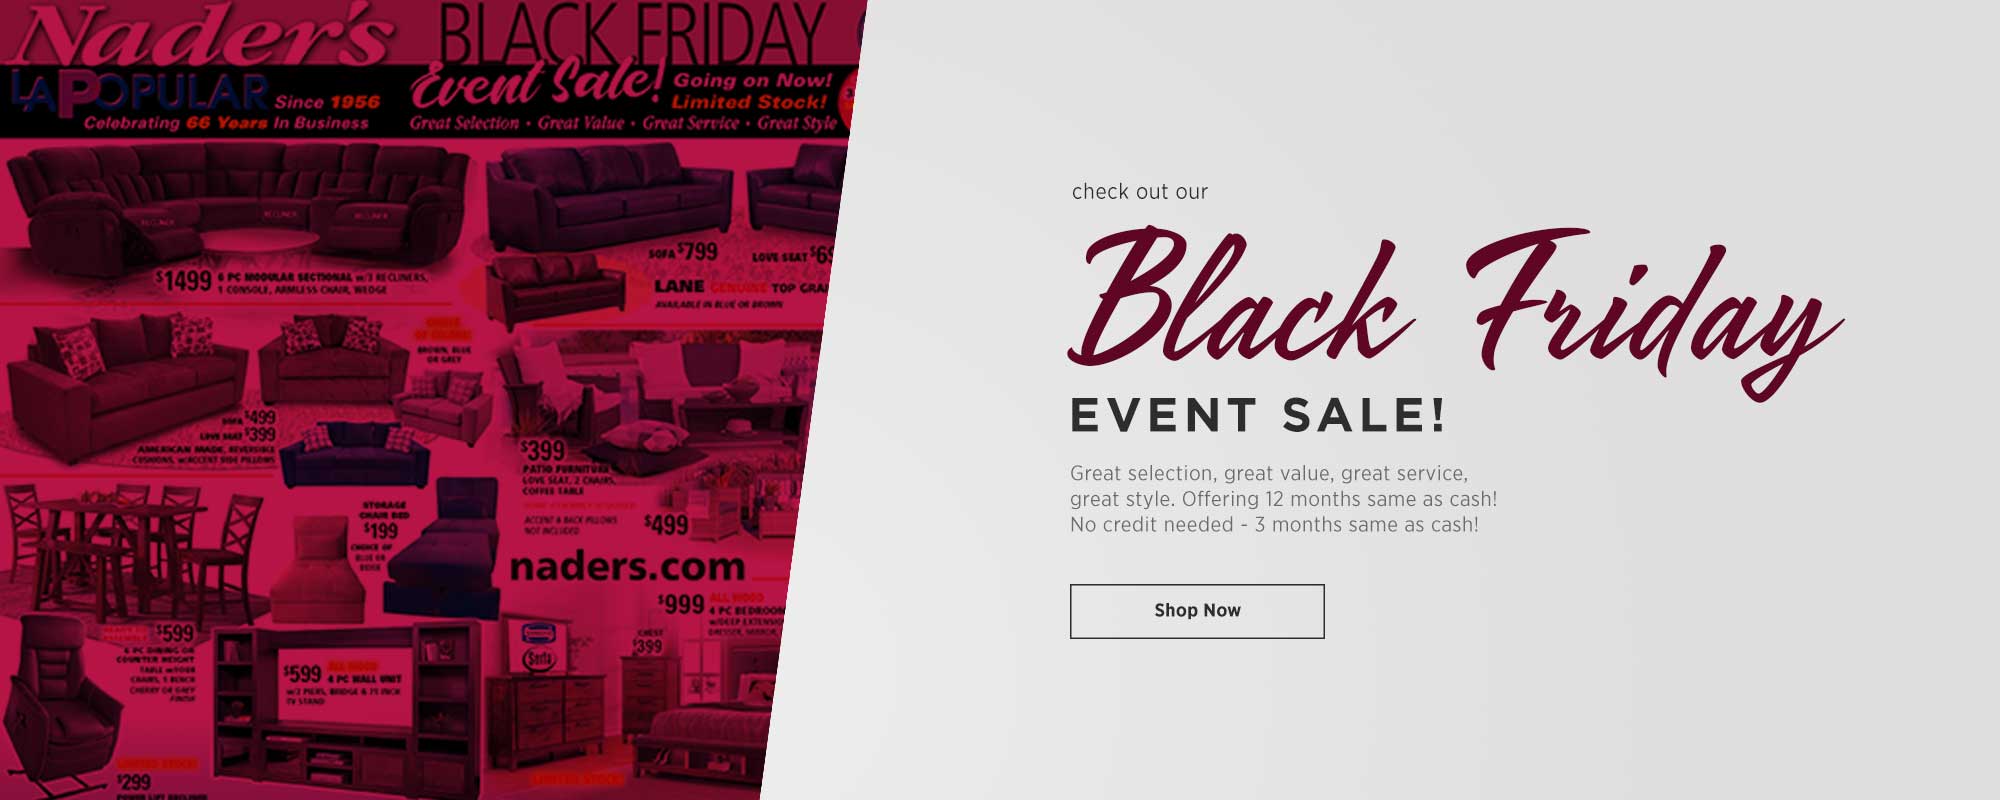 Black Friday Event Sale - Shop our eCircular